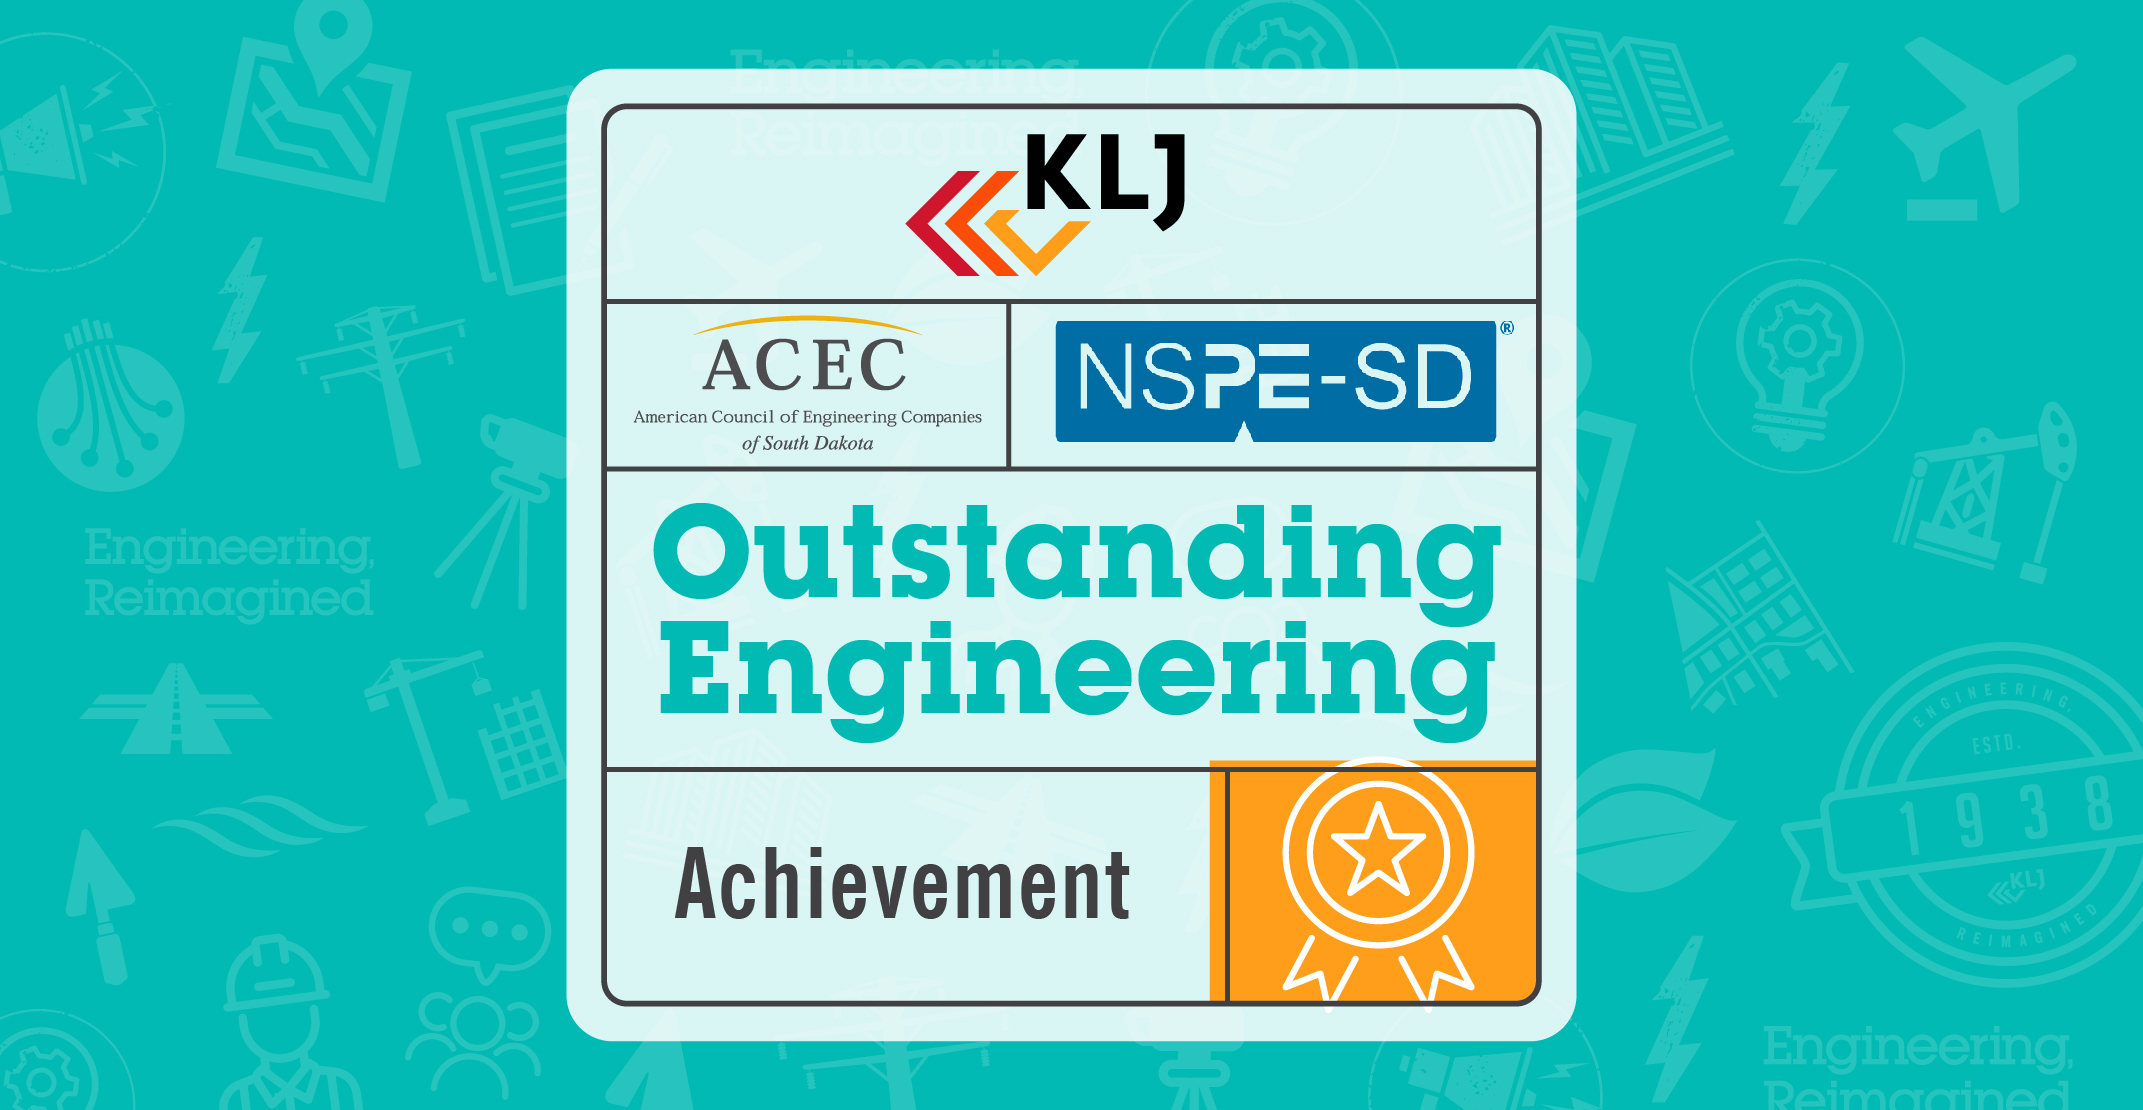 KLJ Honored with Outstanding Engineering Achievement Award in South Dakota